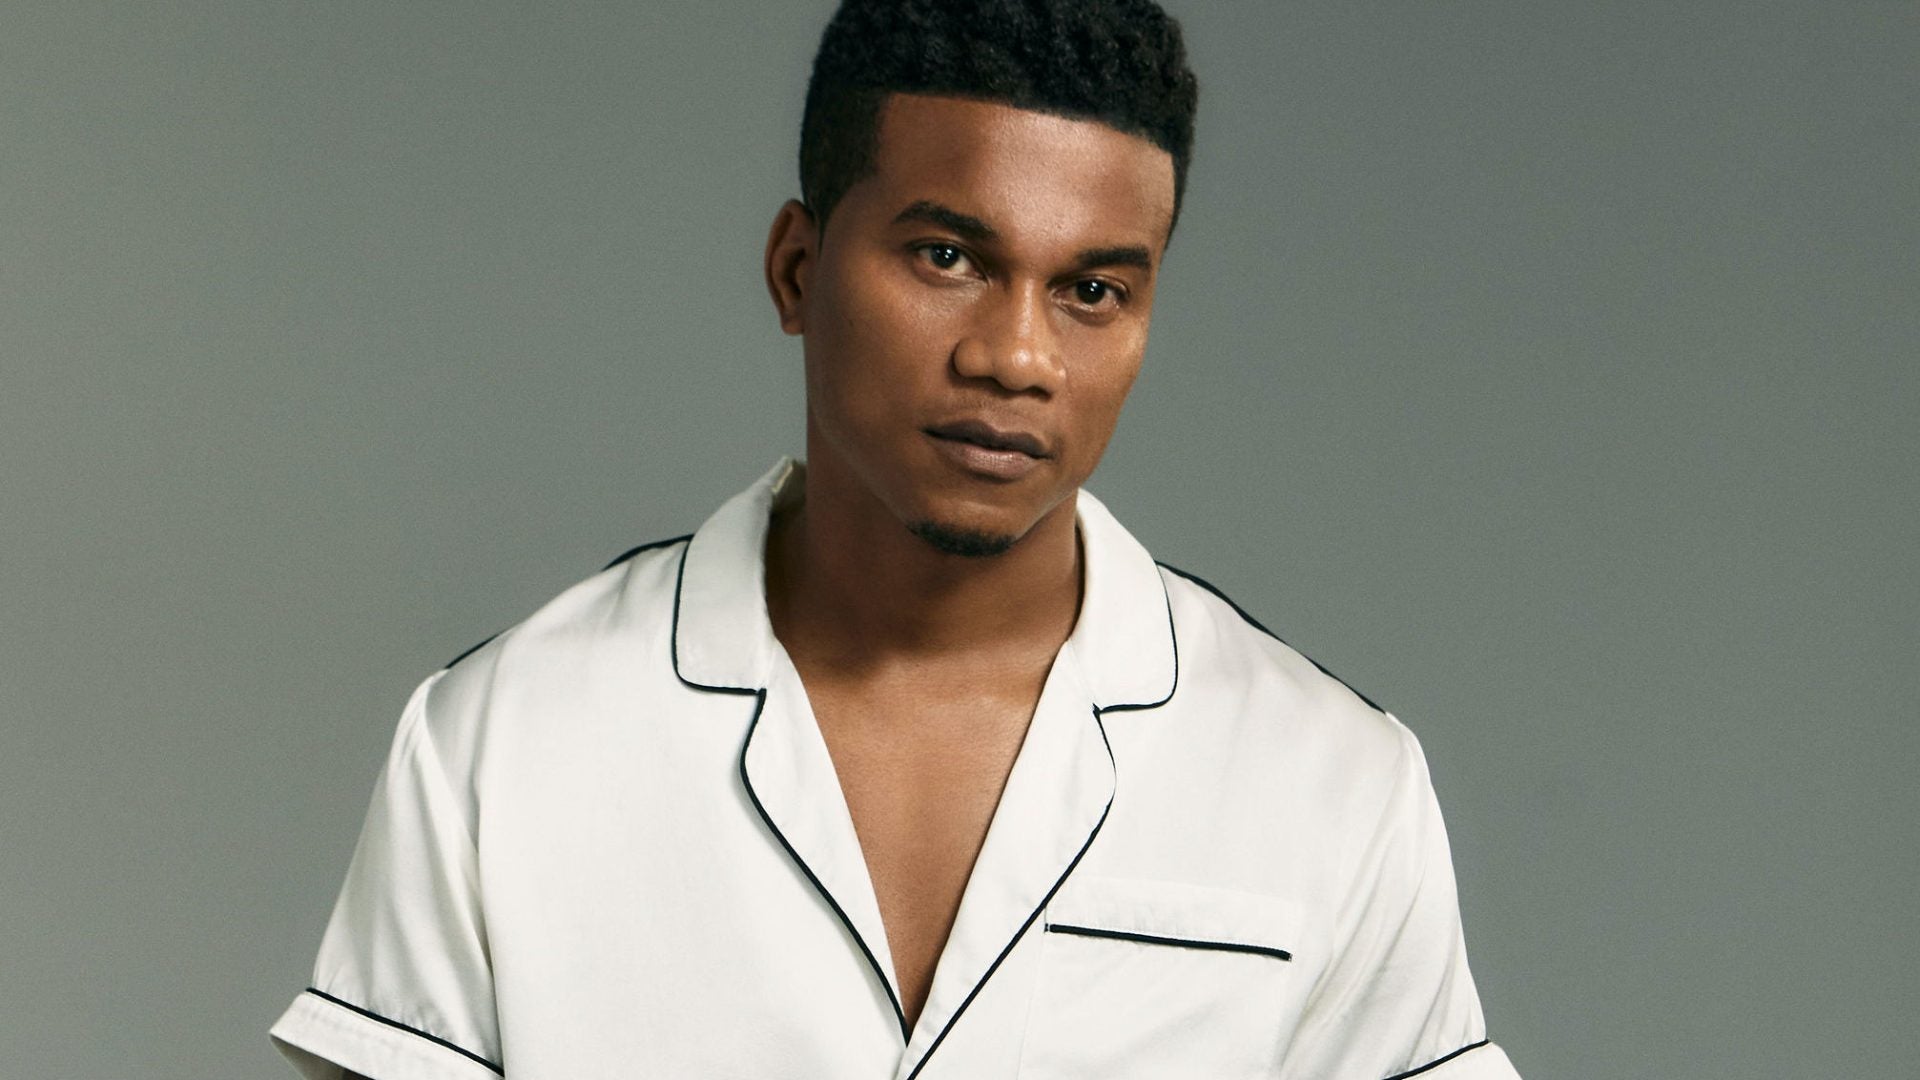 Cory Hardrict On Portraying Black Excellence On 'All American: Homecoming'